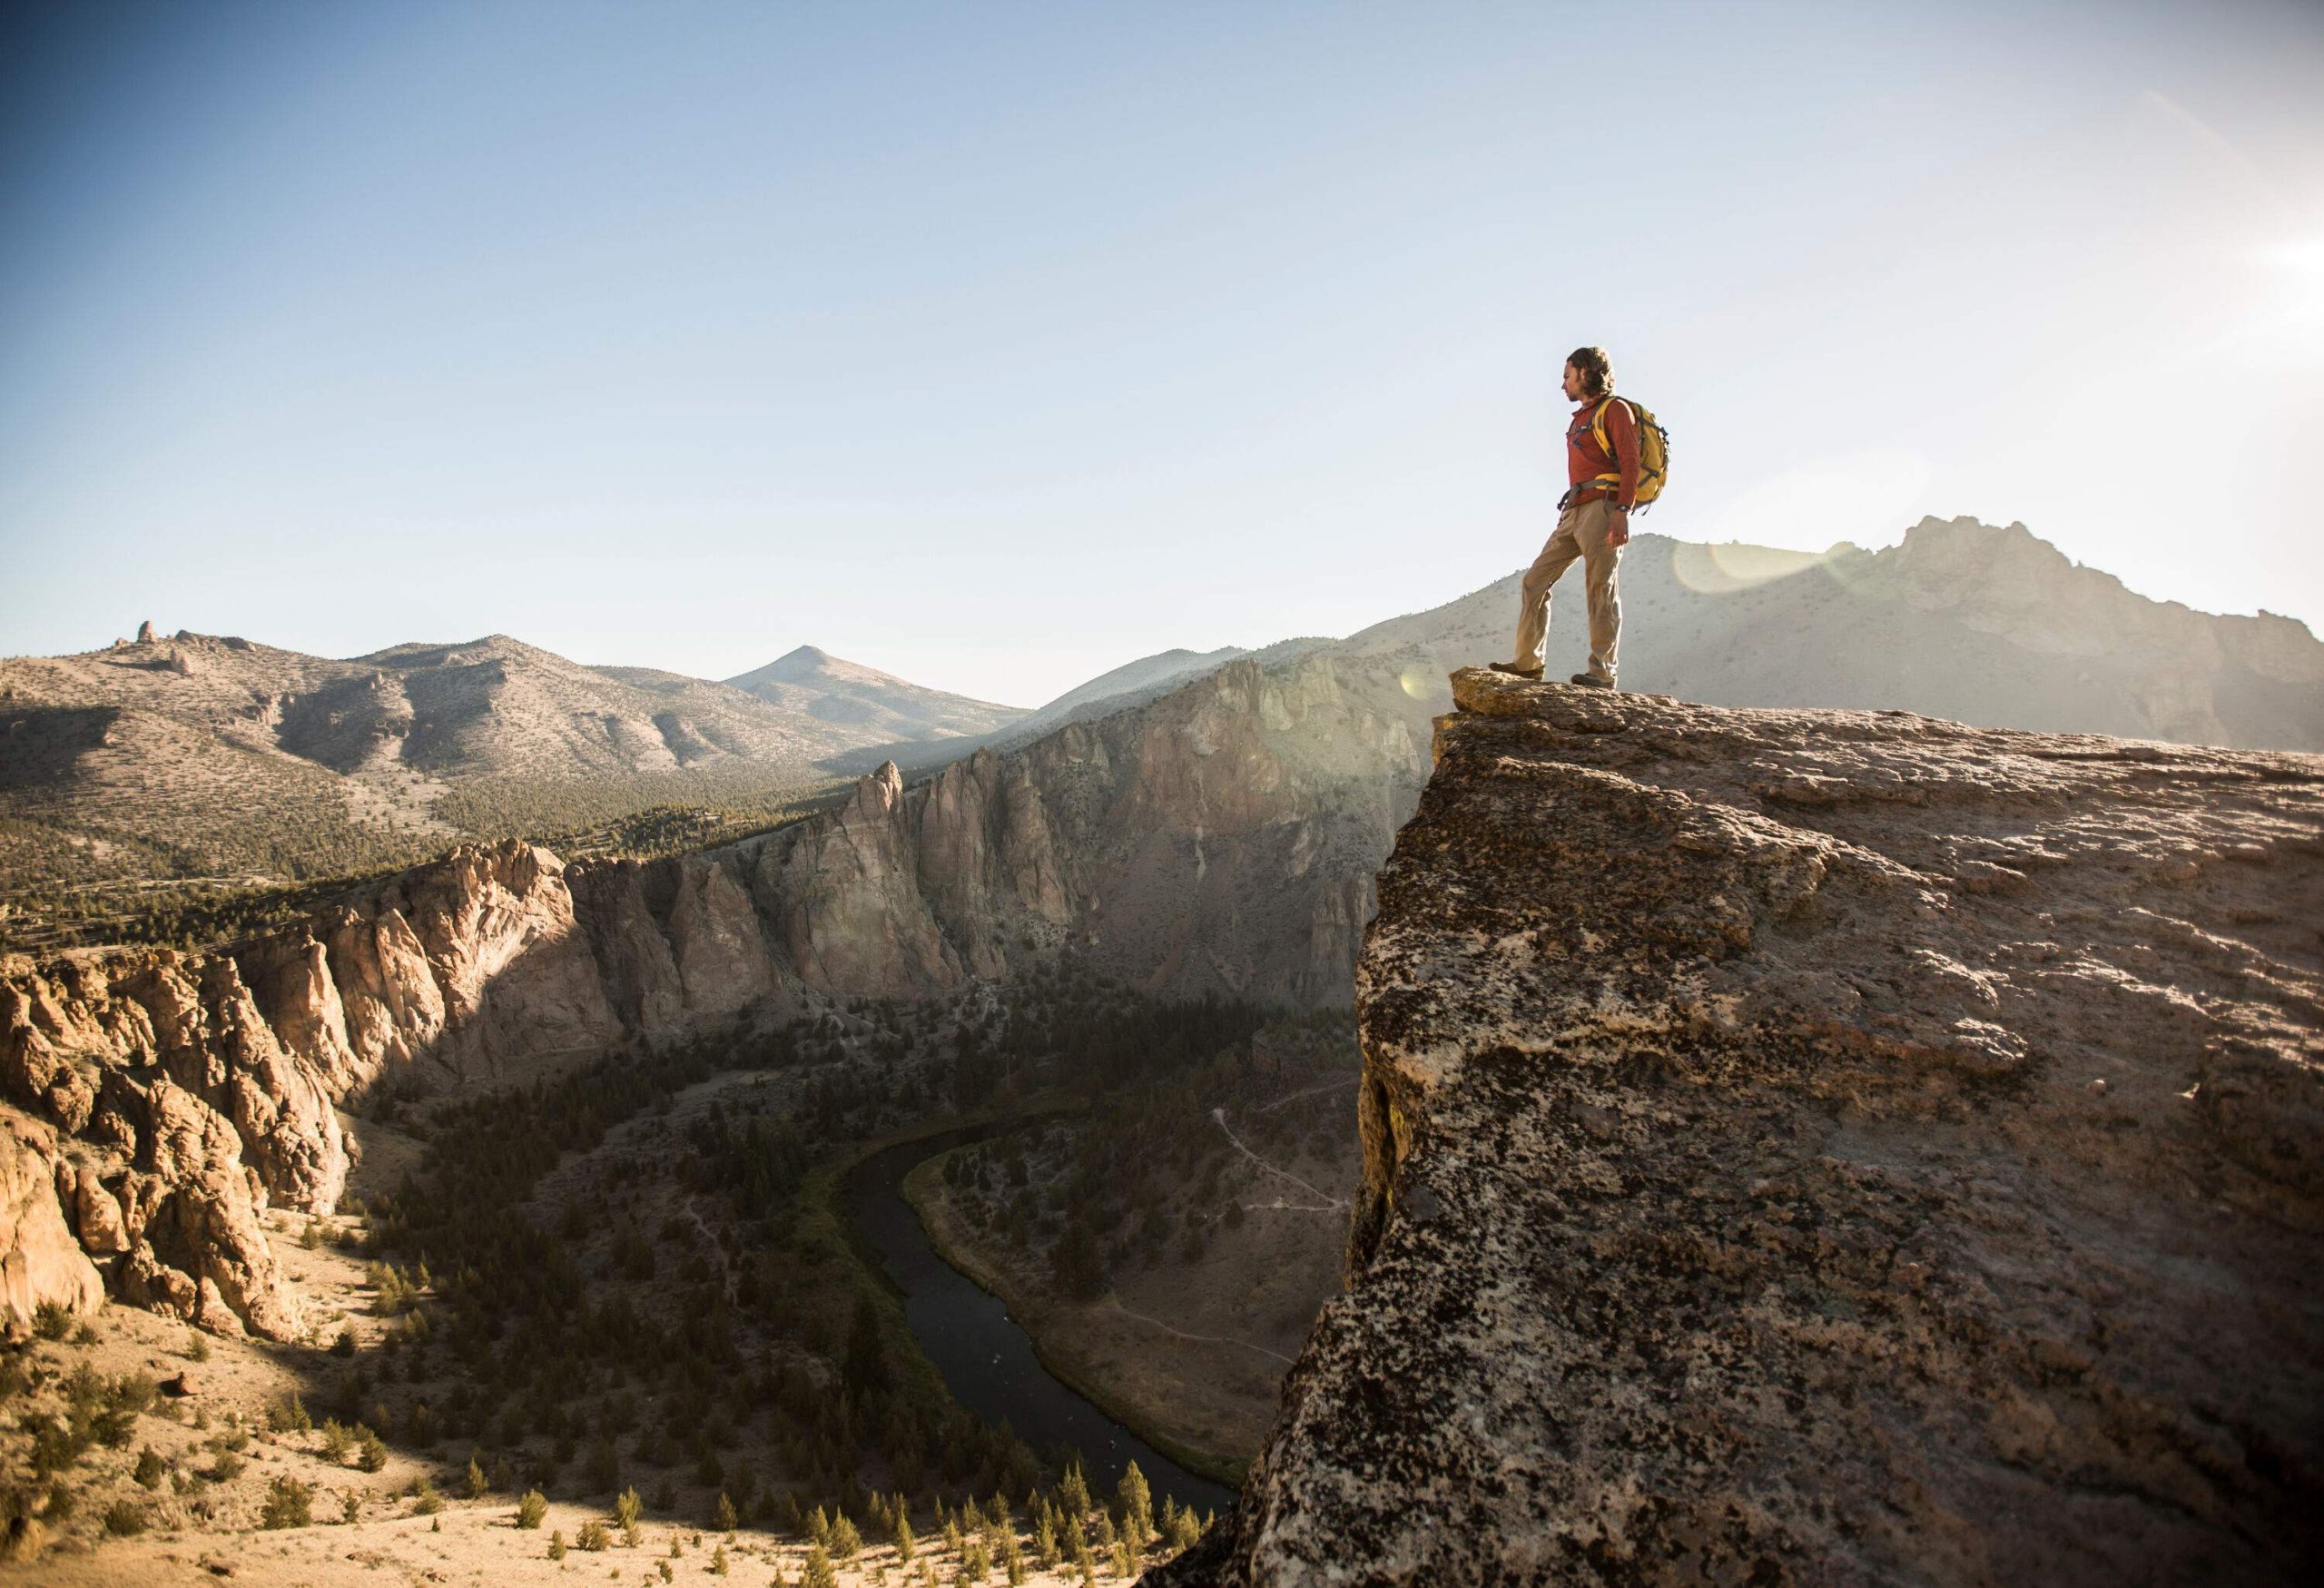 Hiker standing on the edge of a cliff while looking down at the river along the steep canyons.